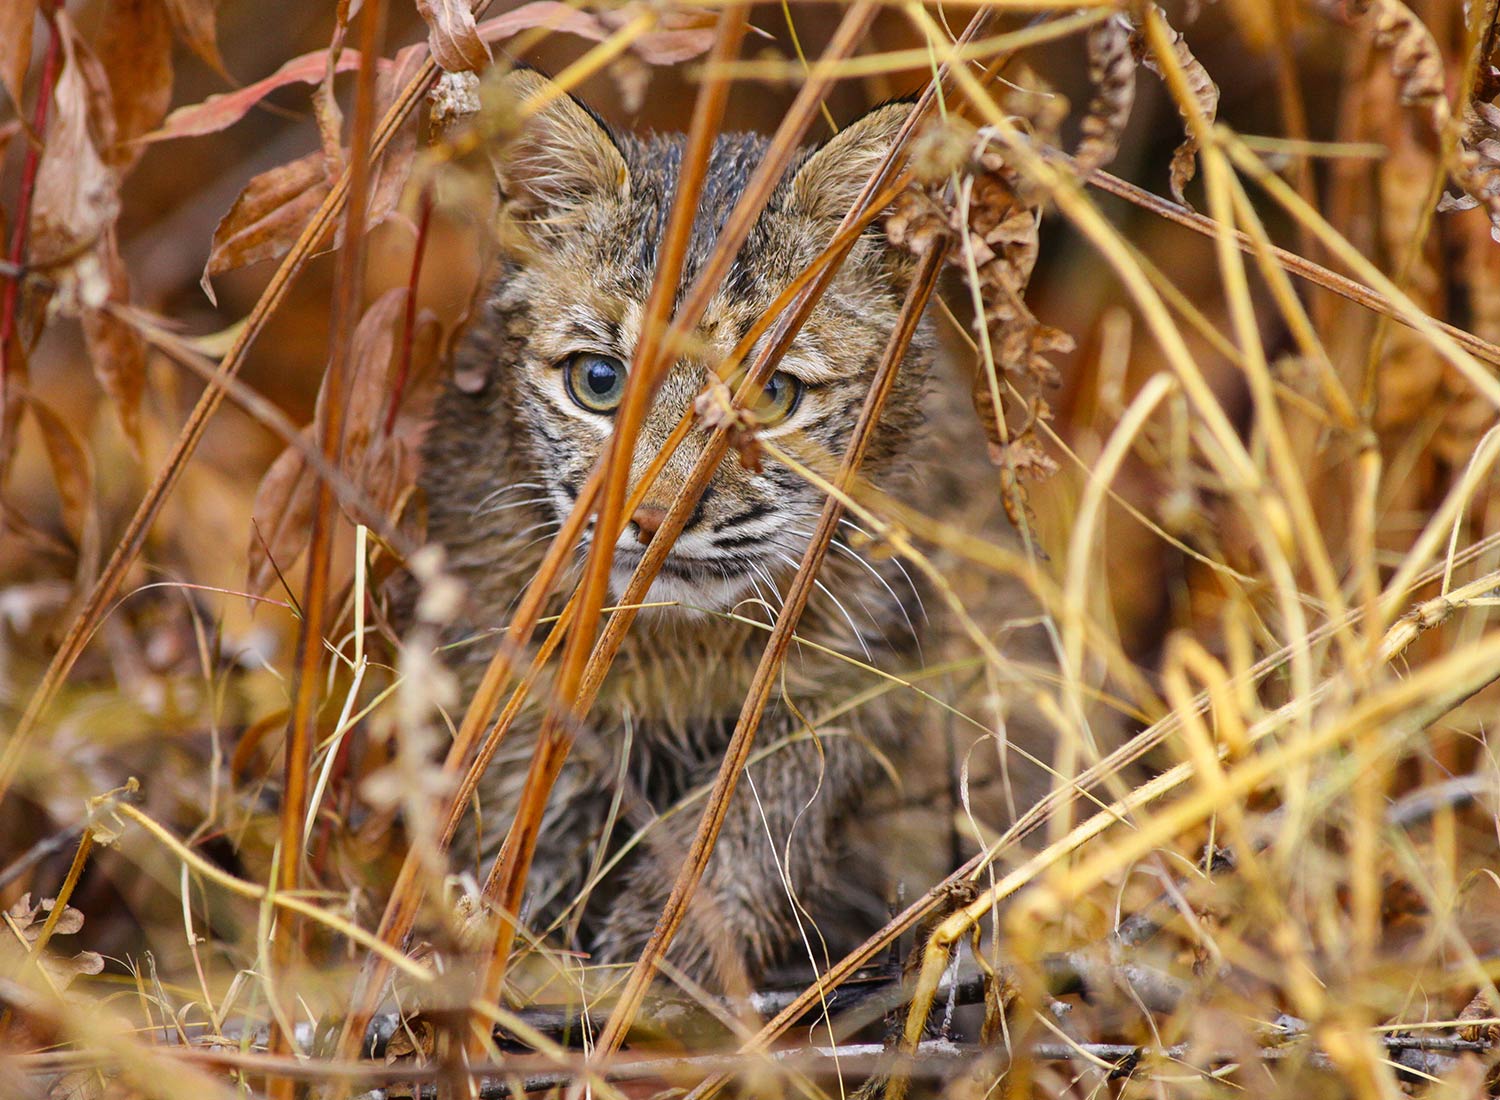 Photo © Susan C. Morse, SHO Farm's wildlife biologist | one of our land stewardship practices is to ensure safe & healthy habitat for wildlife like this bobcat